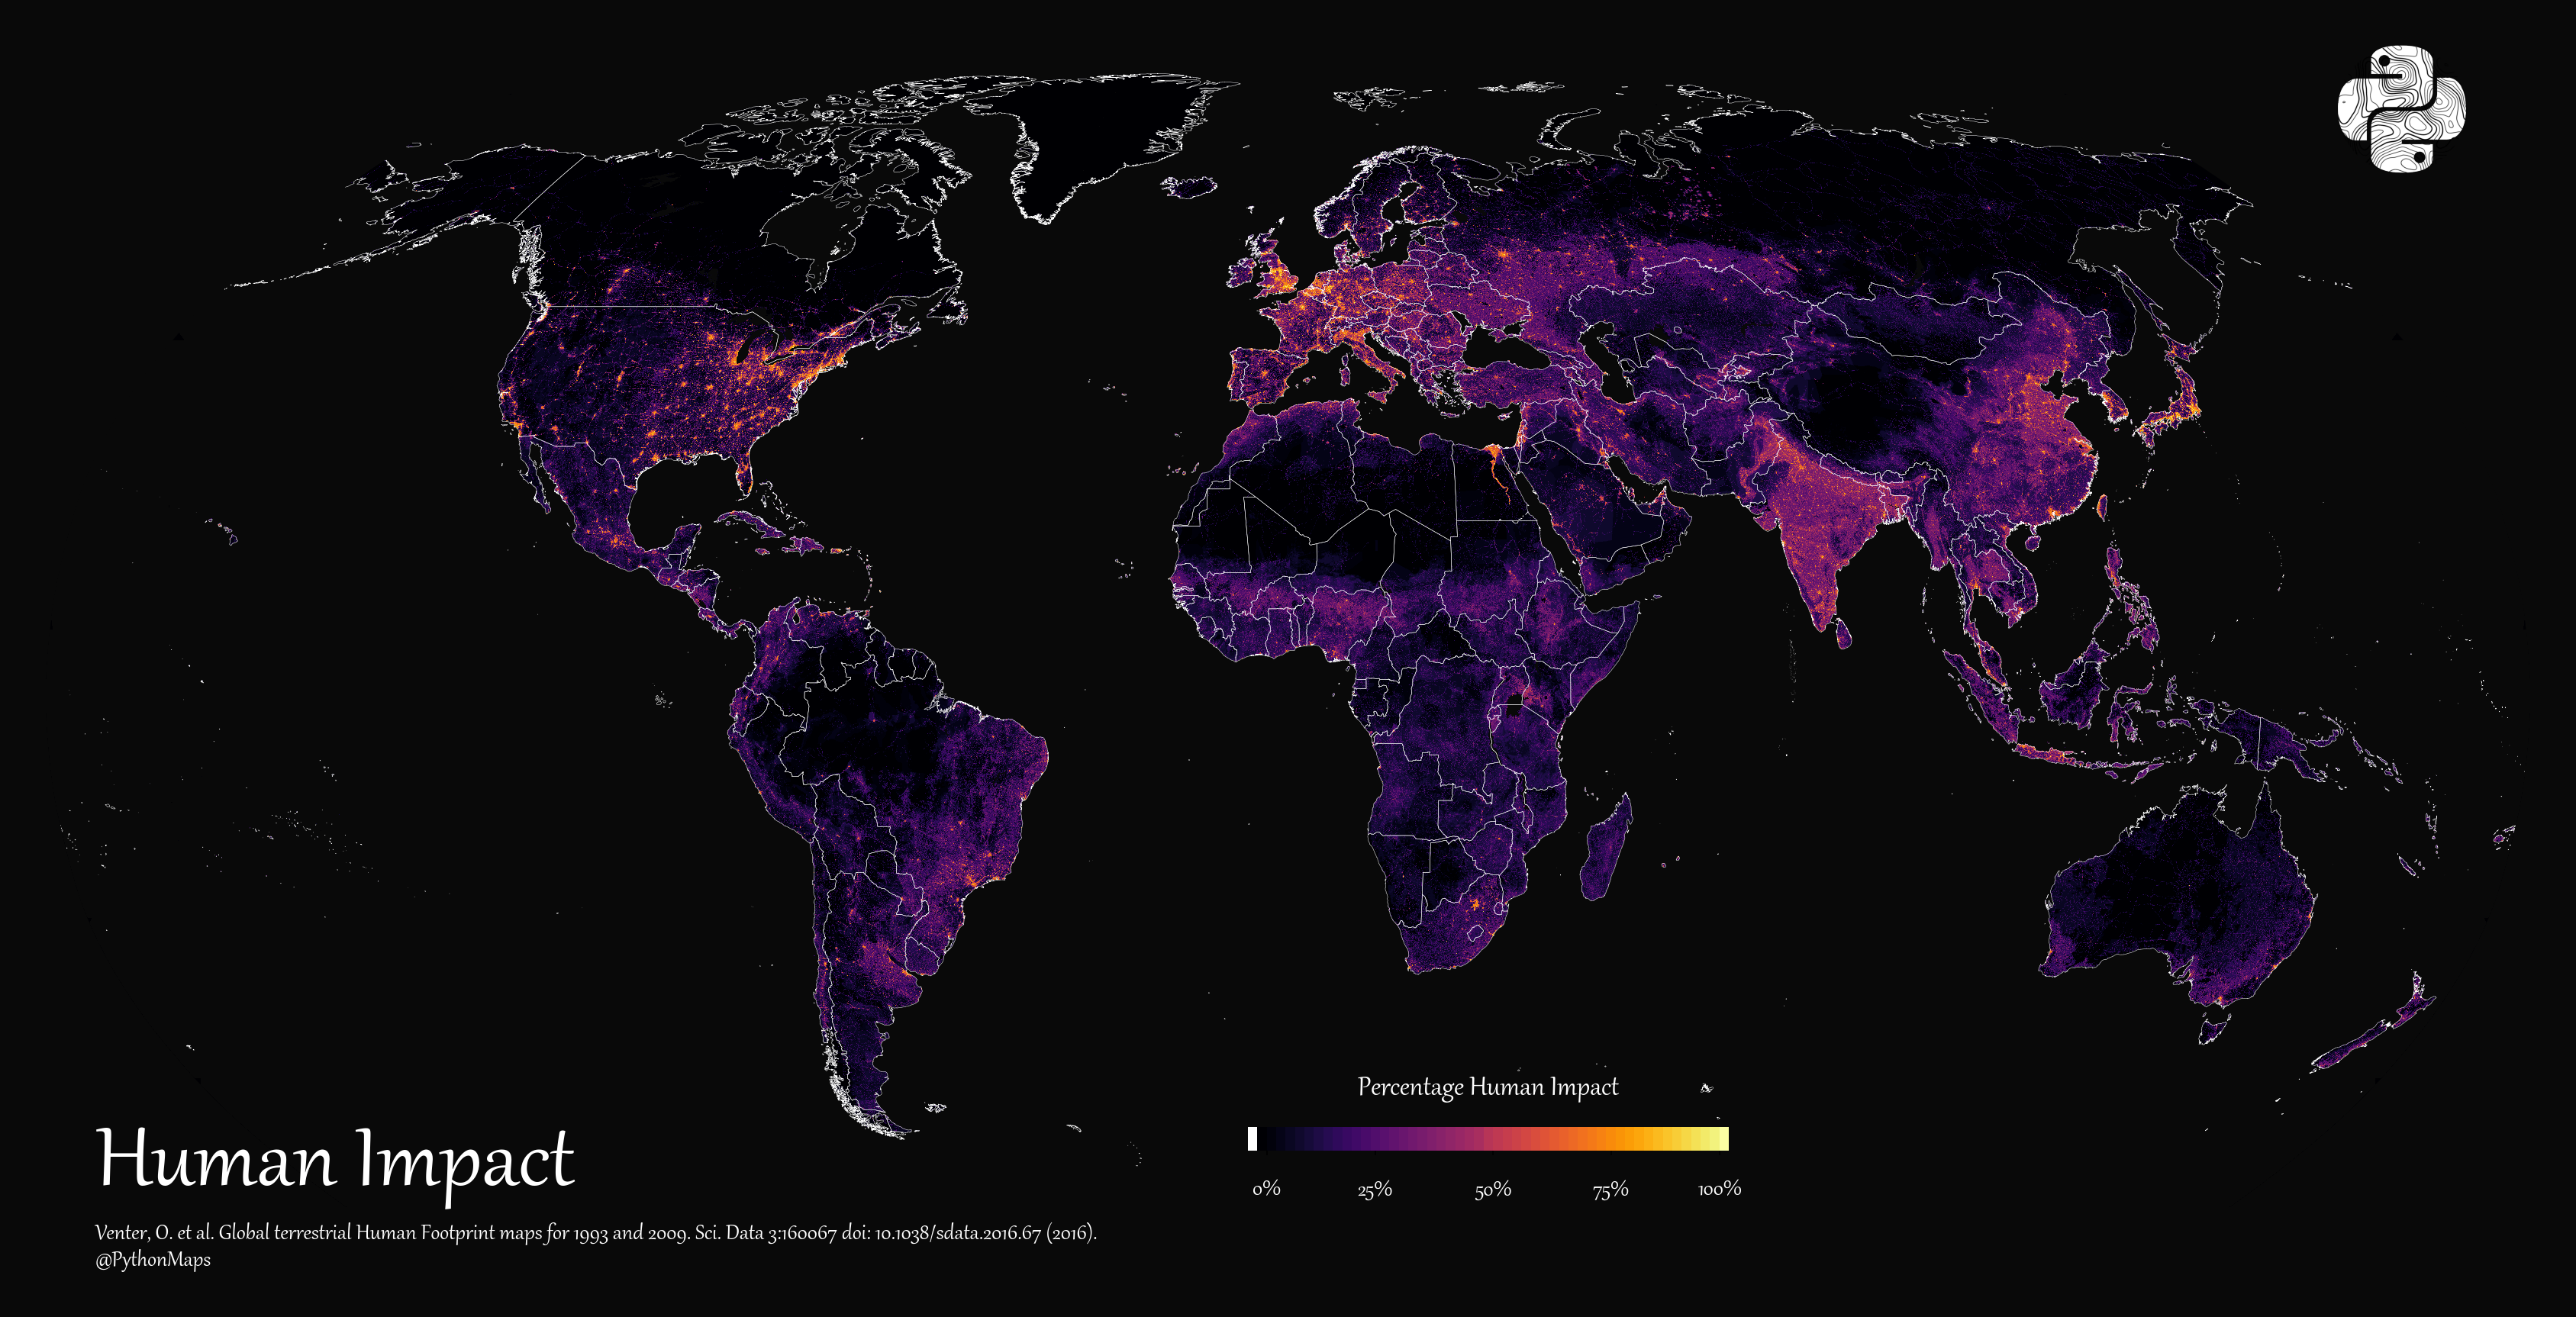 This graphic maps the extent of humanity’s impact on the world from 1993 to 2009